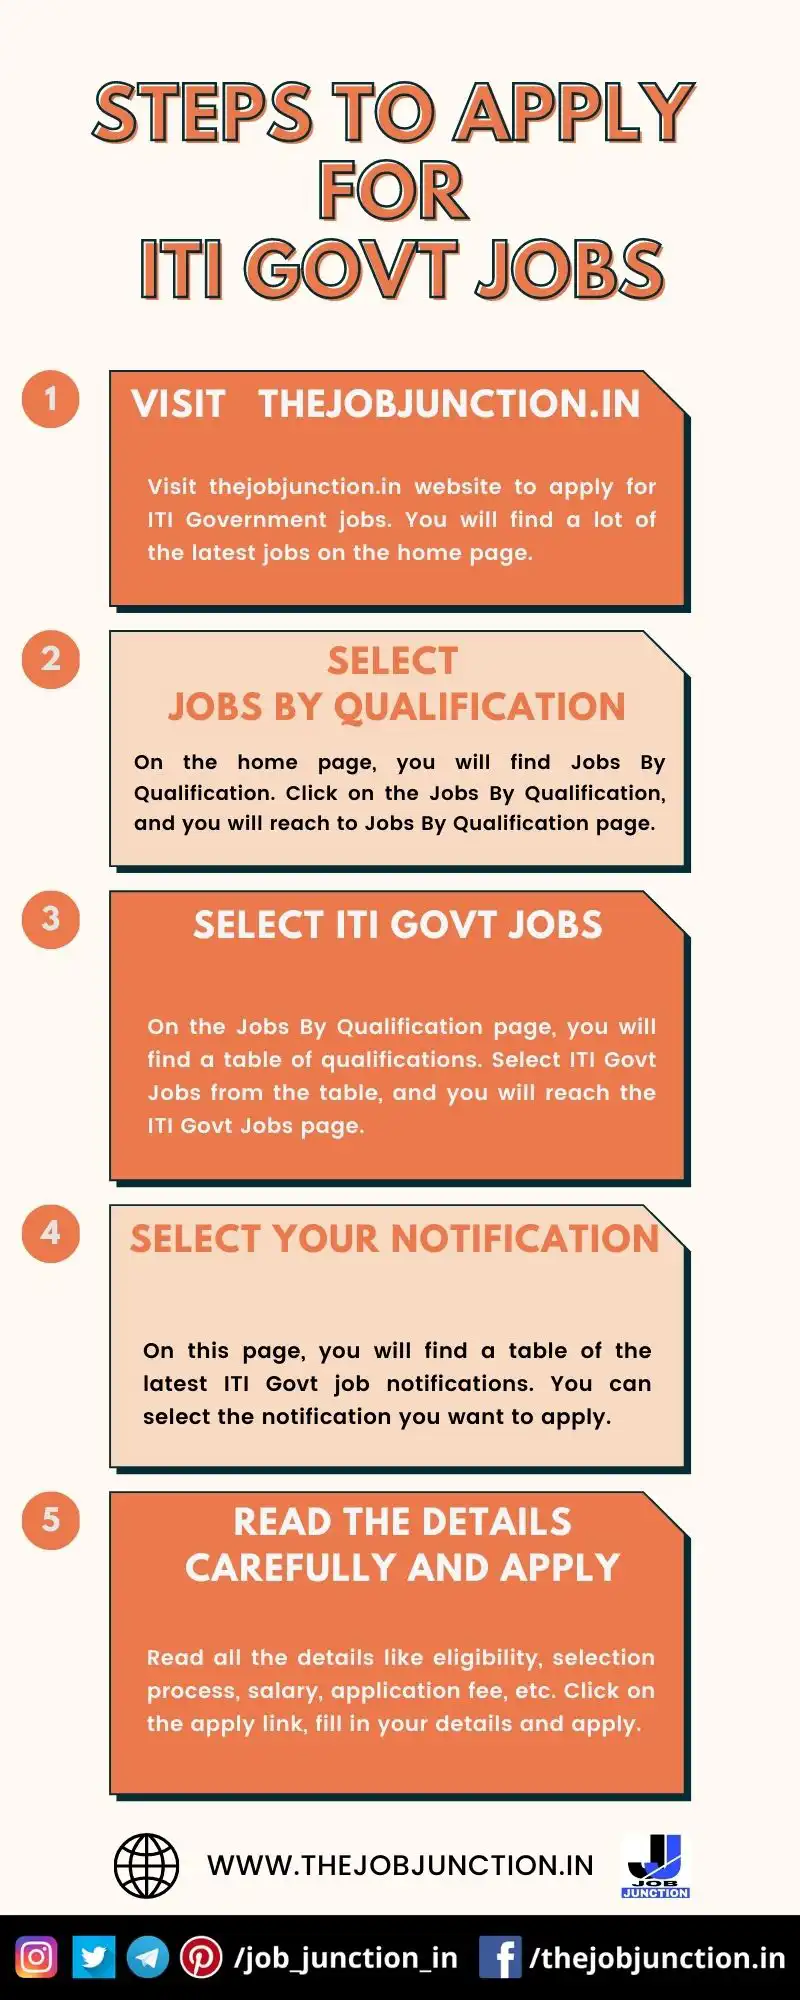 STEPS TO APPLY FOR ITI GOVT JOBS